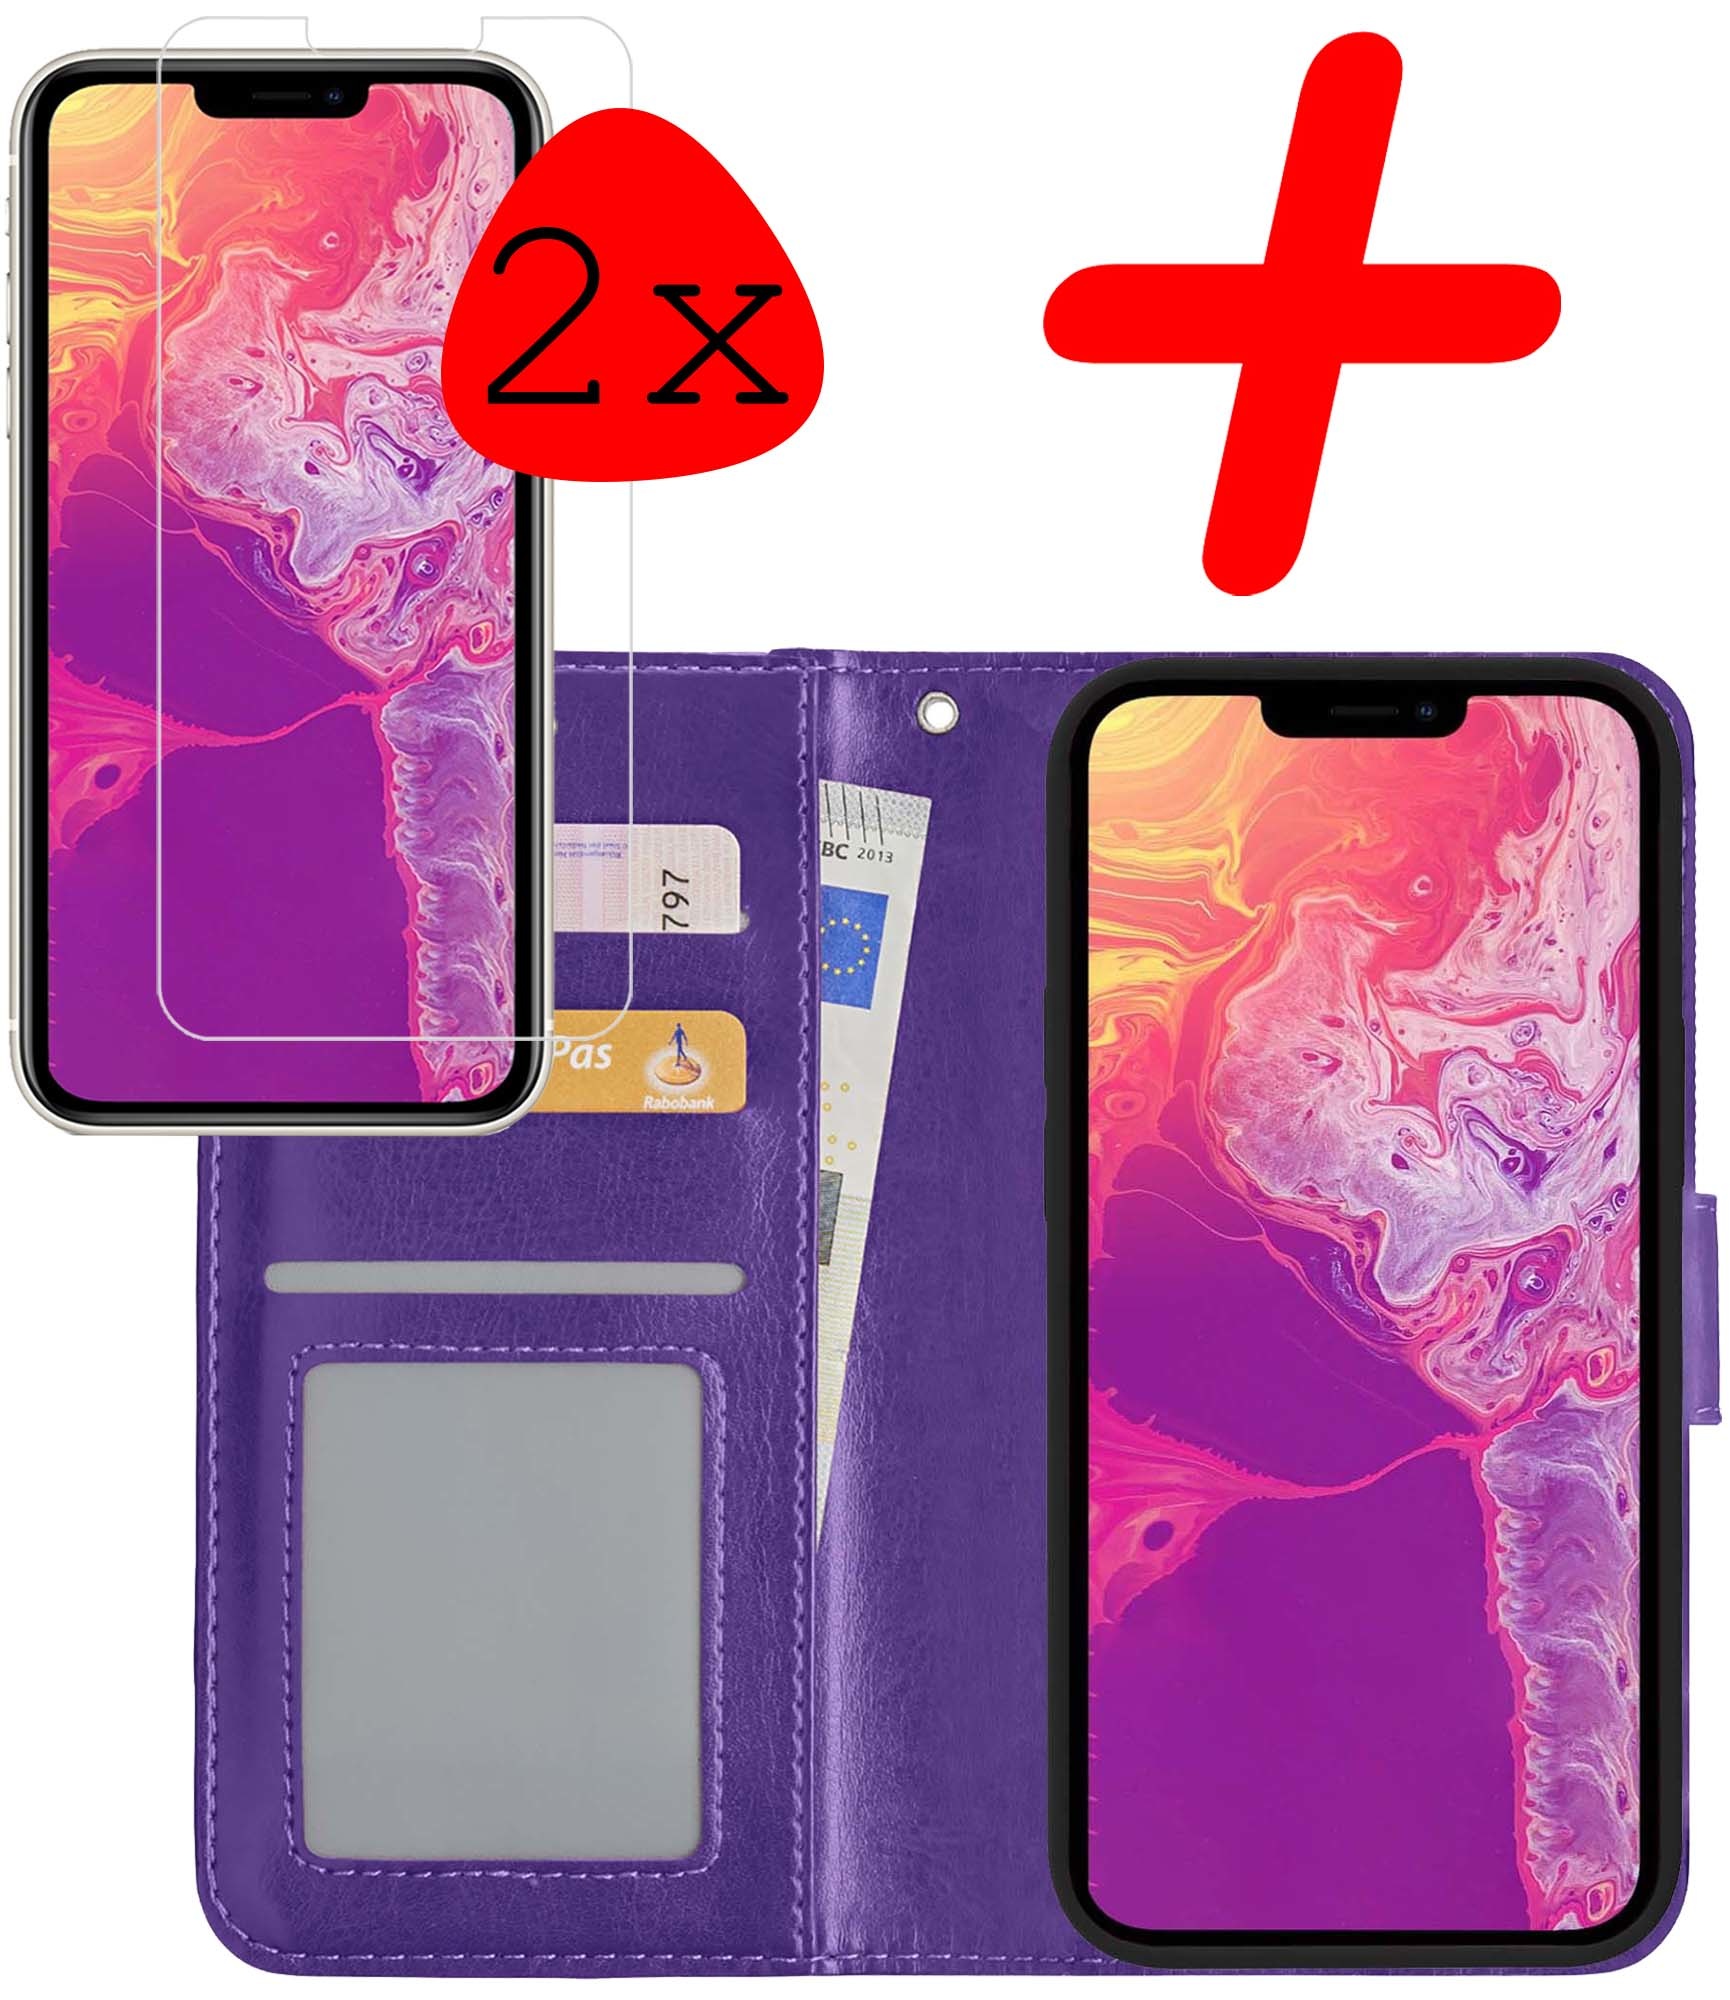 BASEY. iPhone 13 Pro Max Hoesje Bookcase 2x Screenprotector - iPhone 13 Pro Max Case Hoes Cover - iPhone 13 Pro Max Screenprotector 2x - Paars